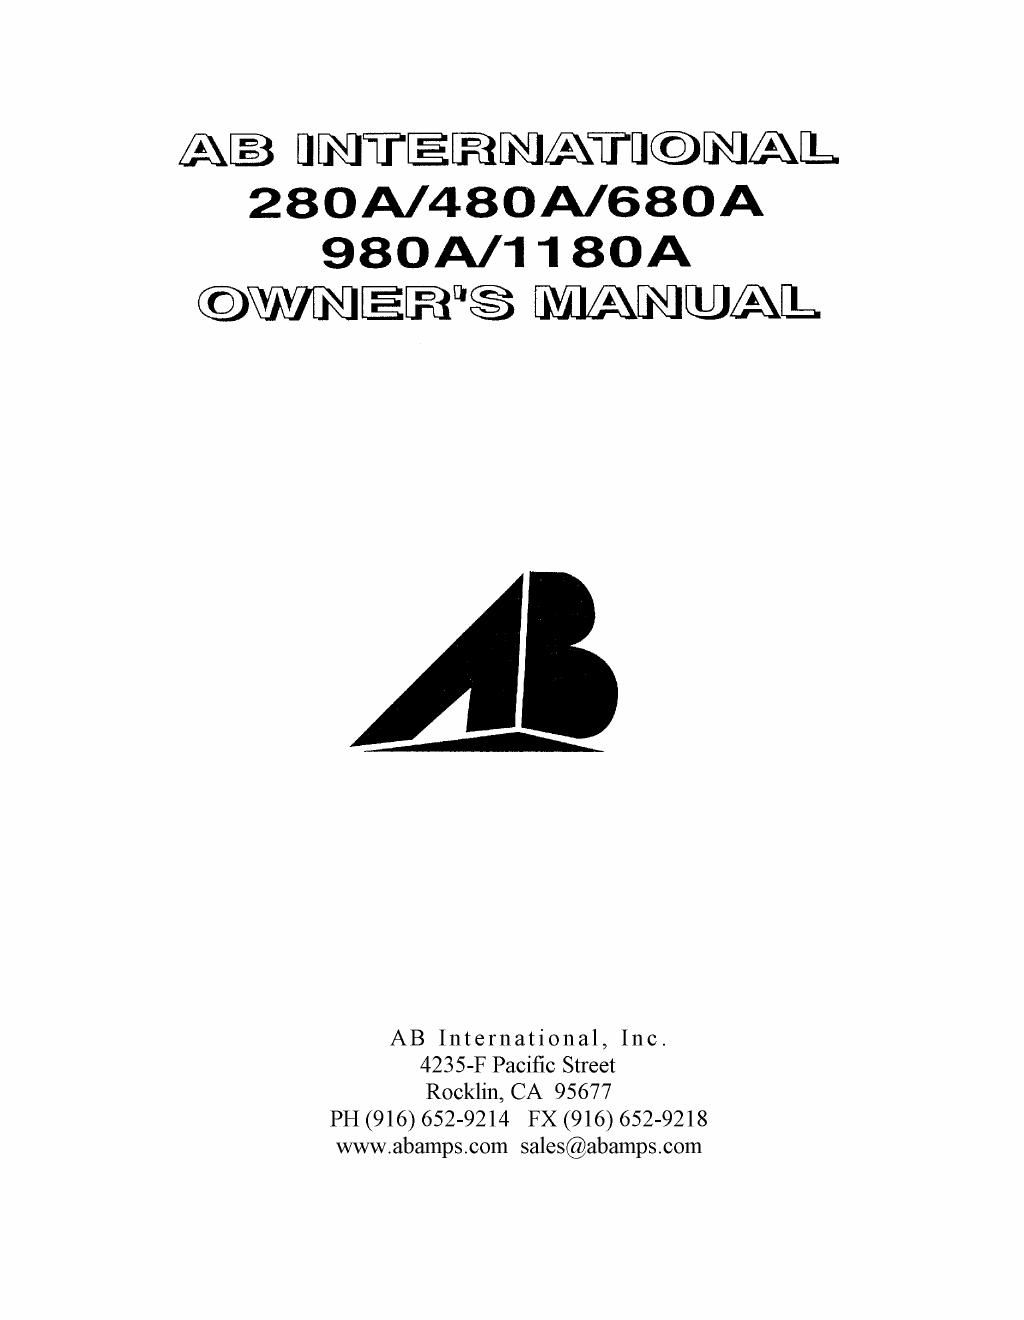 ab international 280 a owners manual